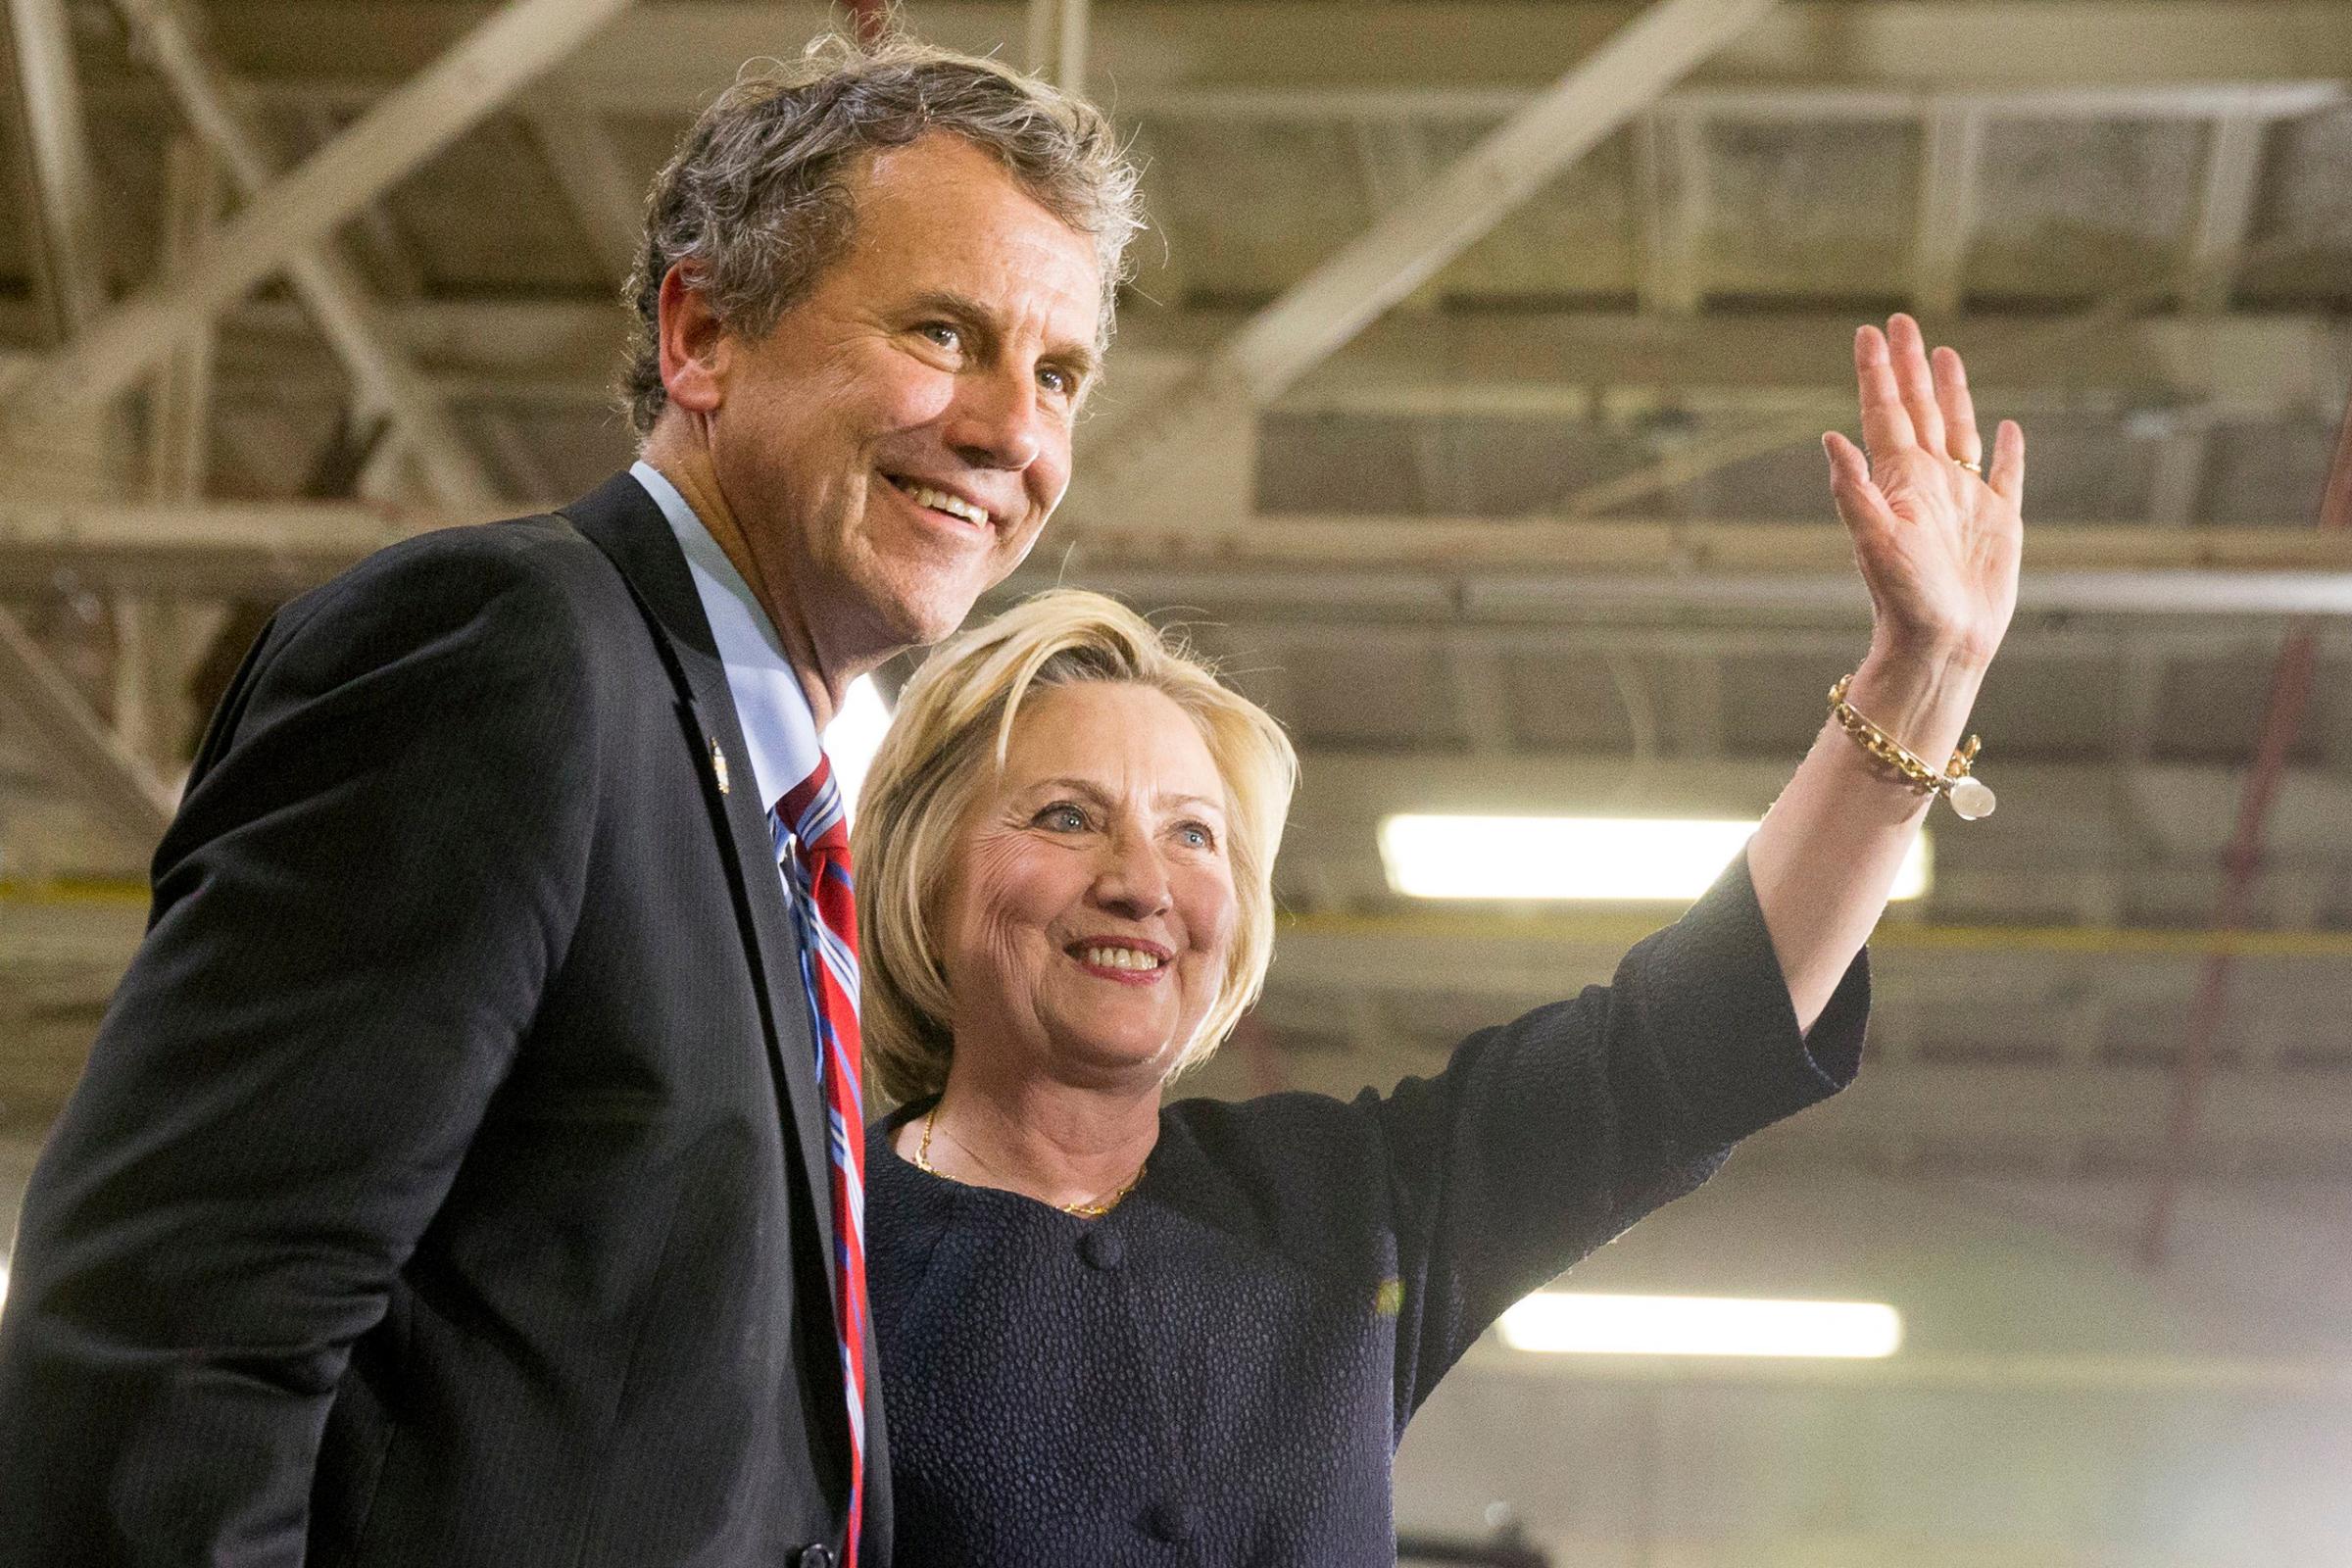 Democratic presidential candidate Hillary Clinton waves to supporters as she stands on stage with Sen. Sherrod Brown after speaking at a rally at a warehouse in Cleveland on June 13, 2016.